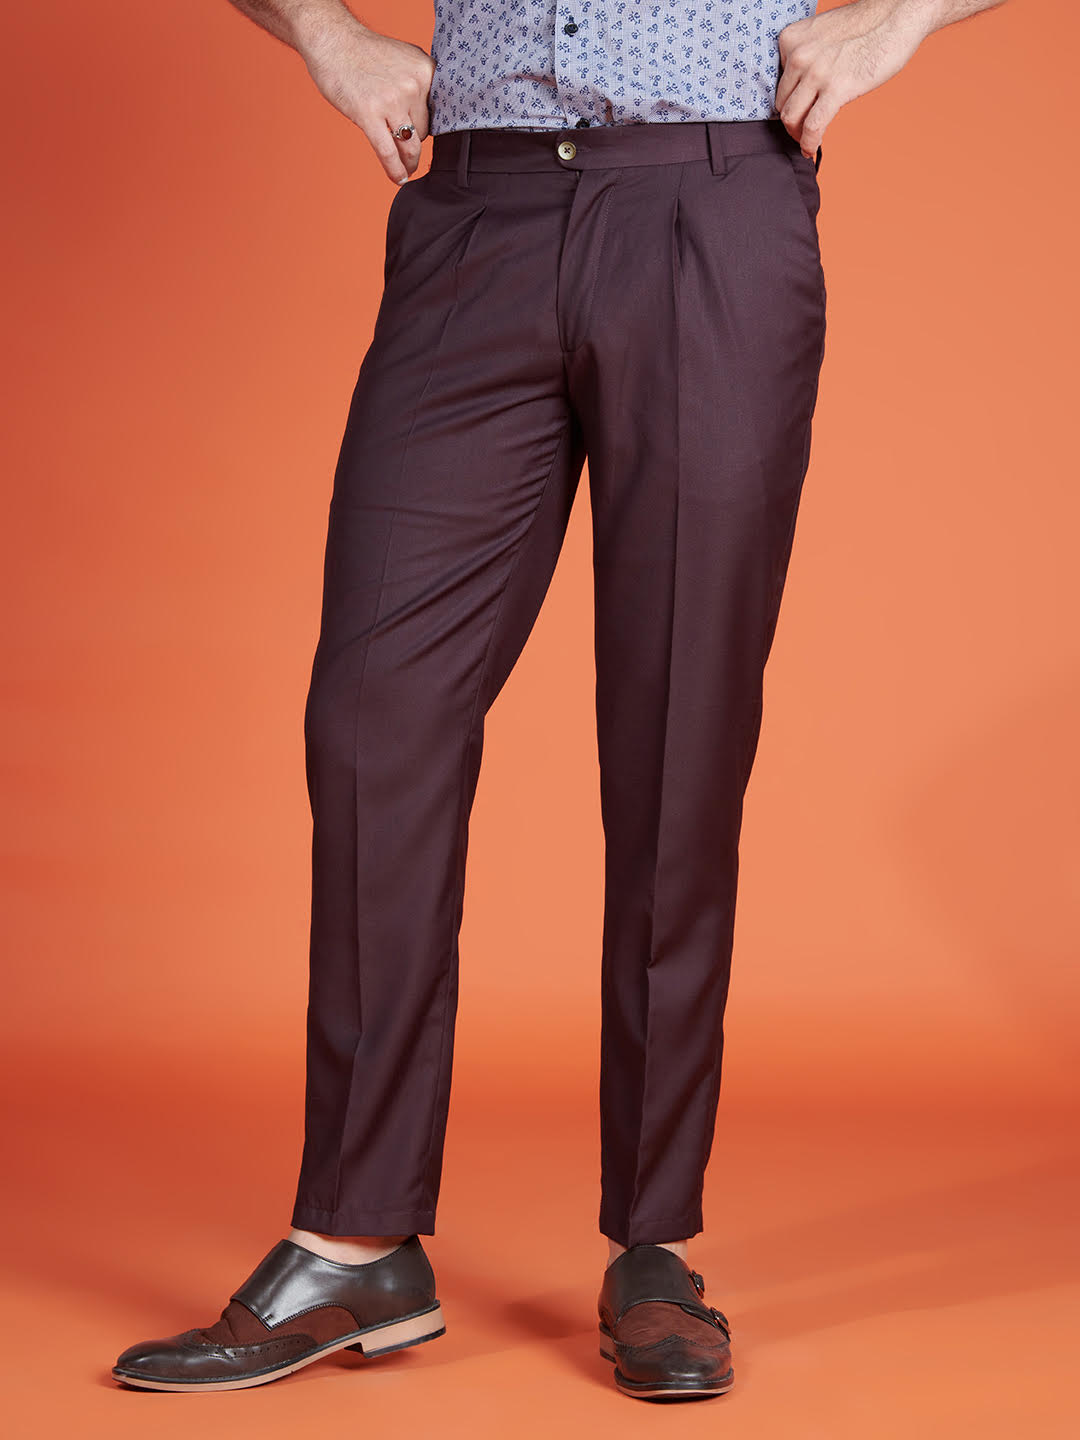 Buy Trousers & Formal Pants for Men Online in India